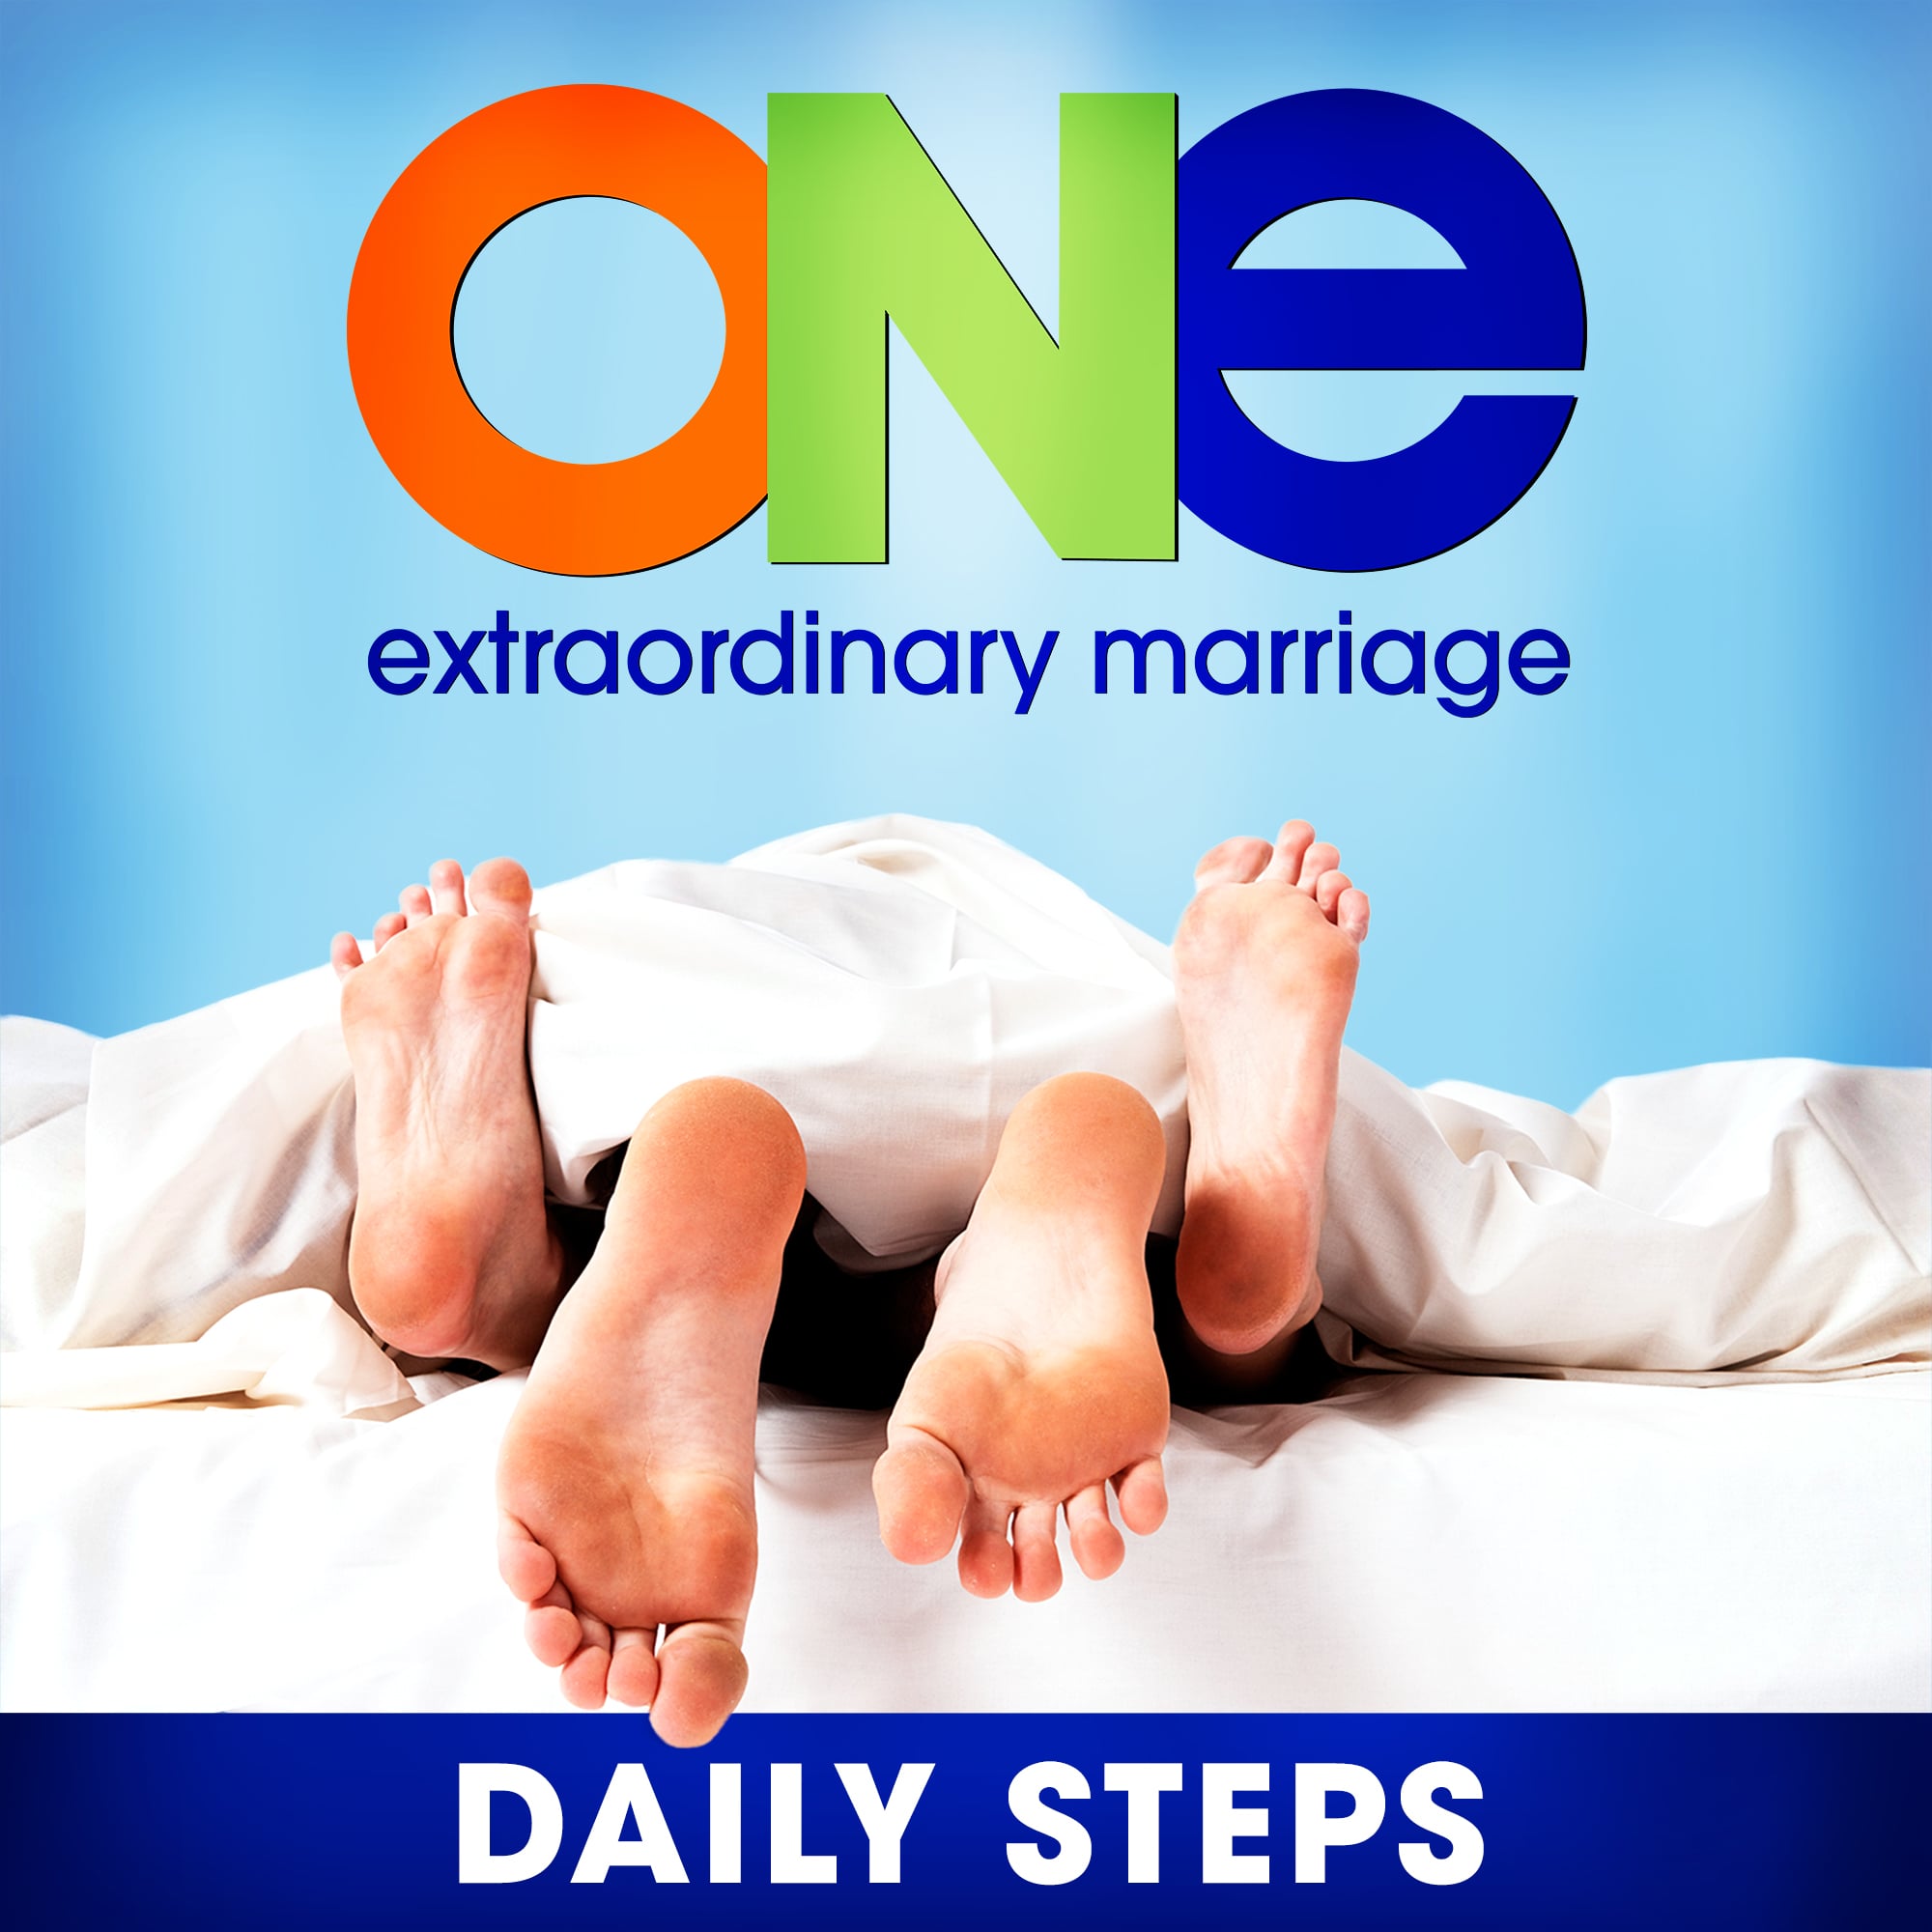 DS 015: How Do You Prioritize Your Marriage When You Are Physically, Emotionally and Spiritually Drained?